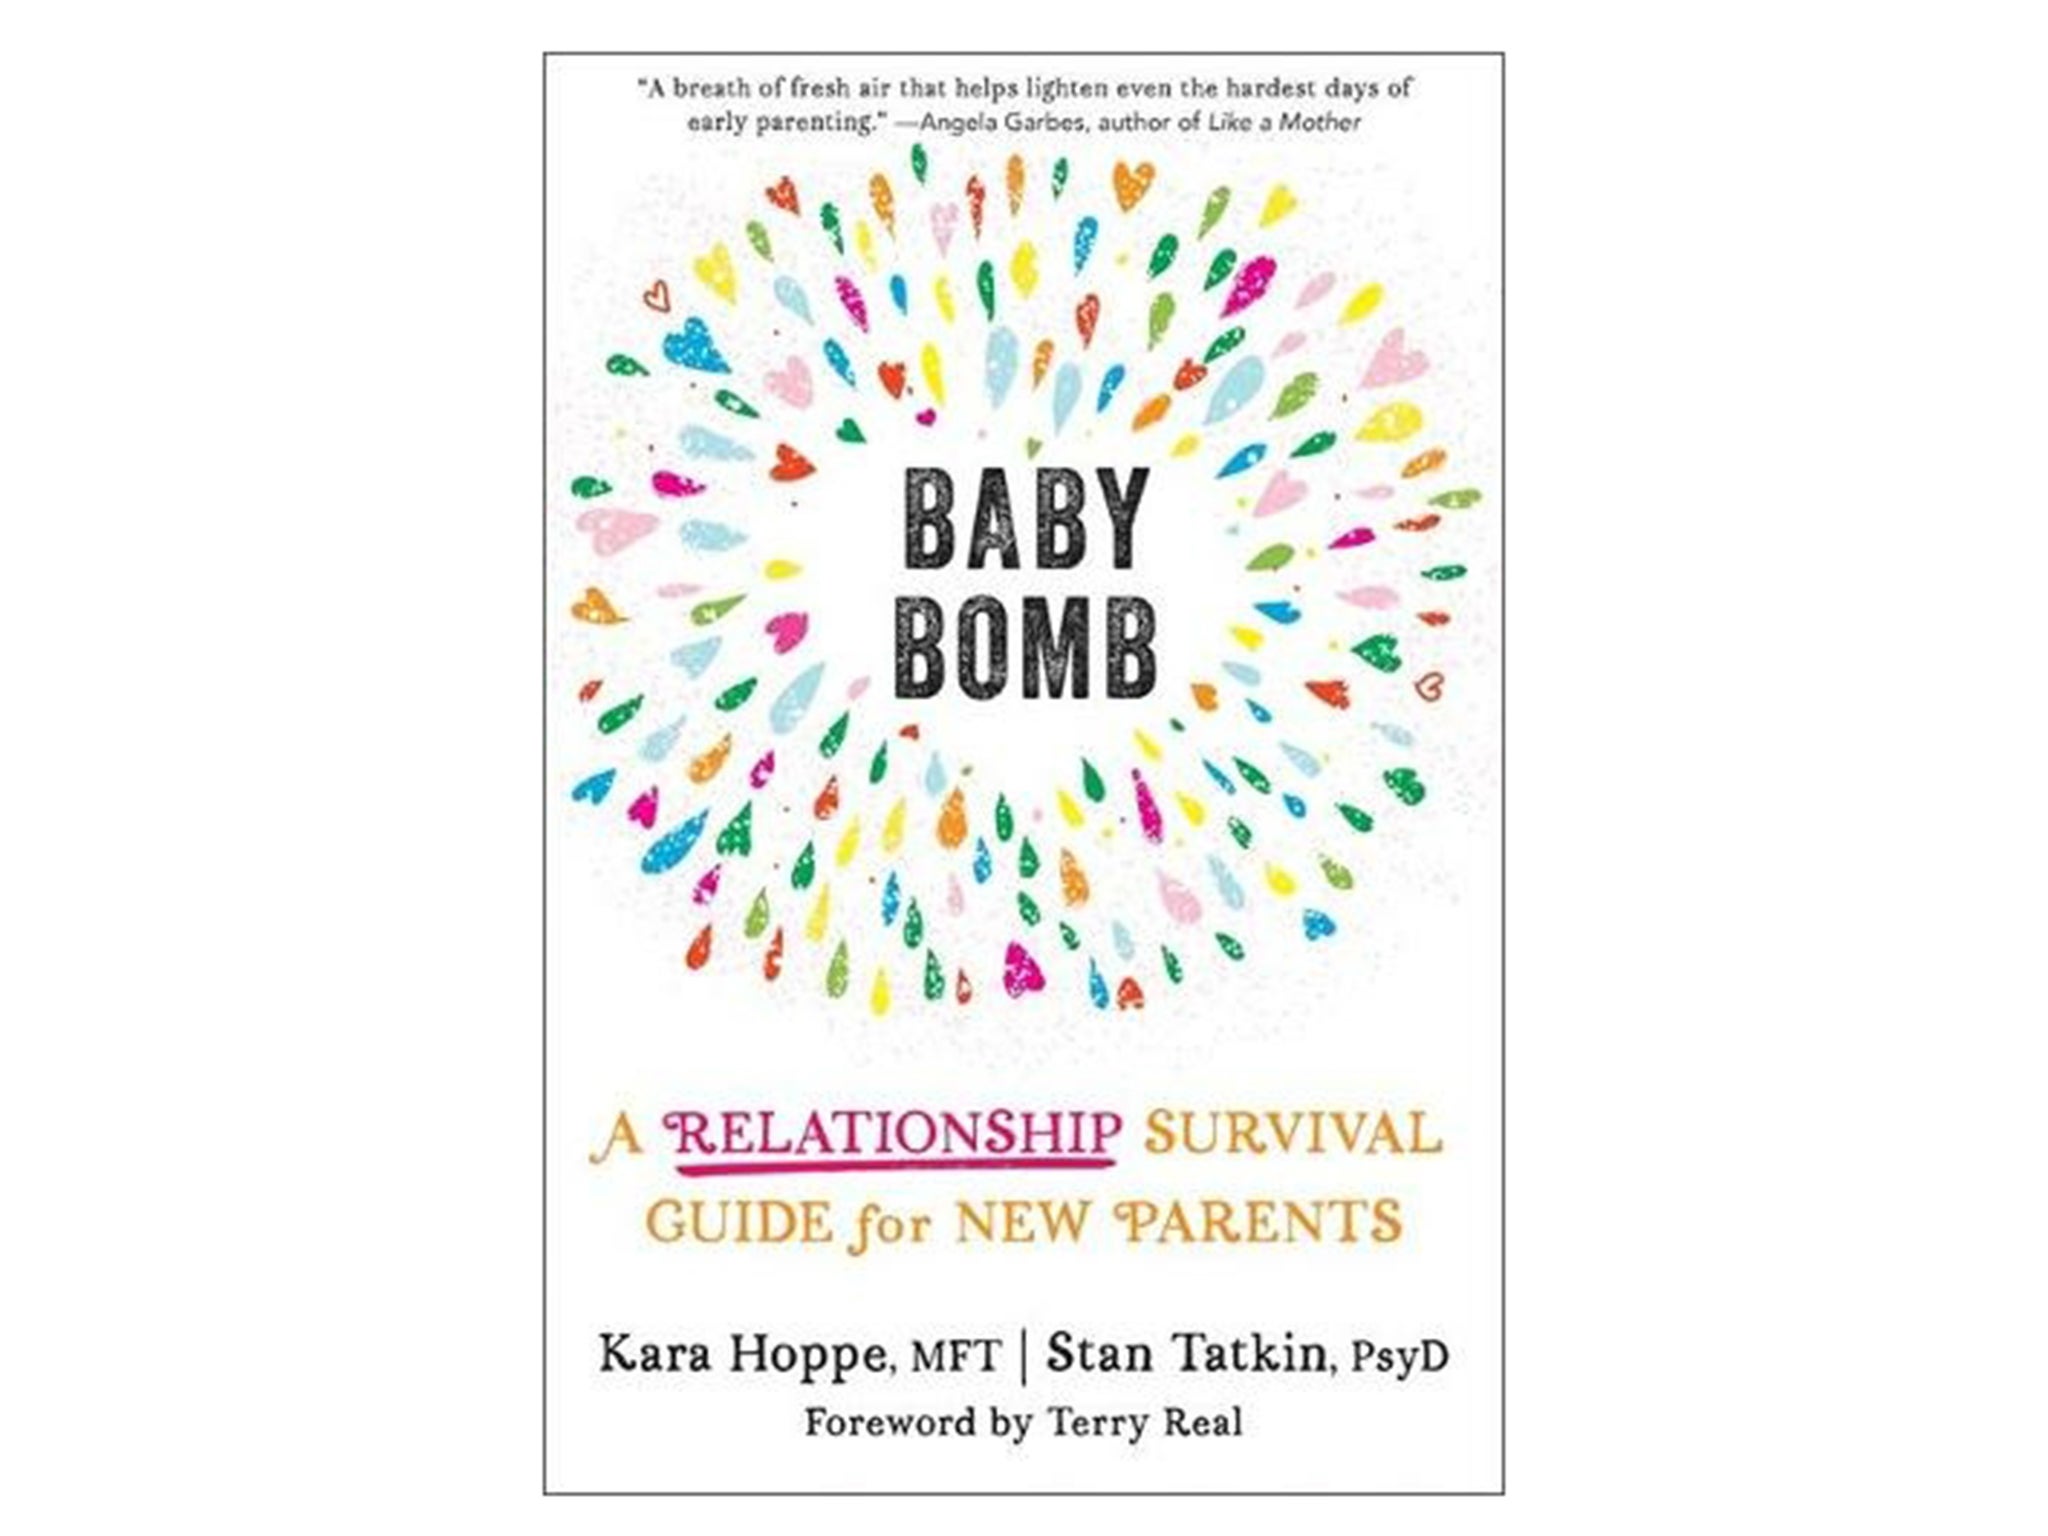 Baby Bomb A Relationship Survival Guide for New Parents by Kara Hoppe, Stan Tatkin, Terrence Real. Published by New Harbinger £11.19, WHSmith.jpg